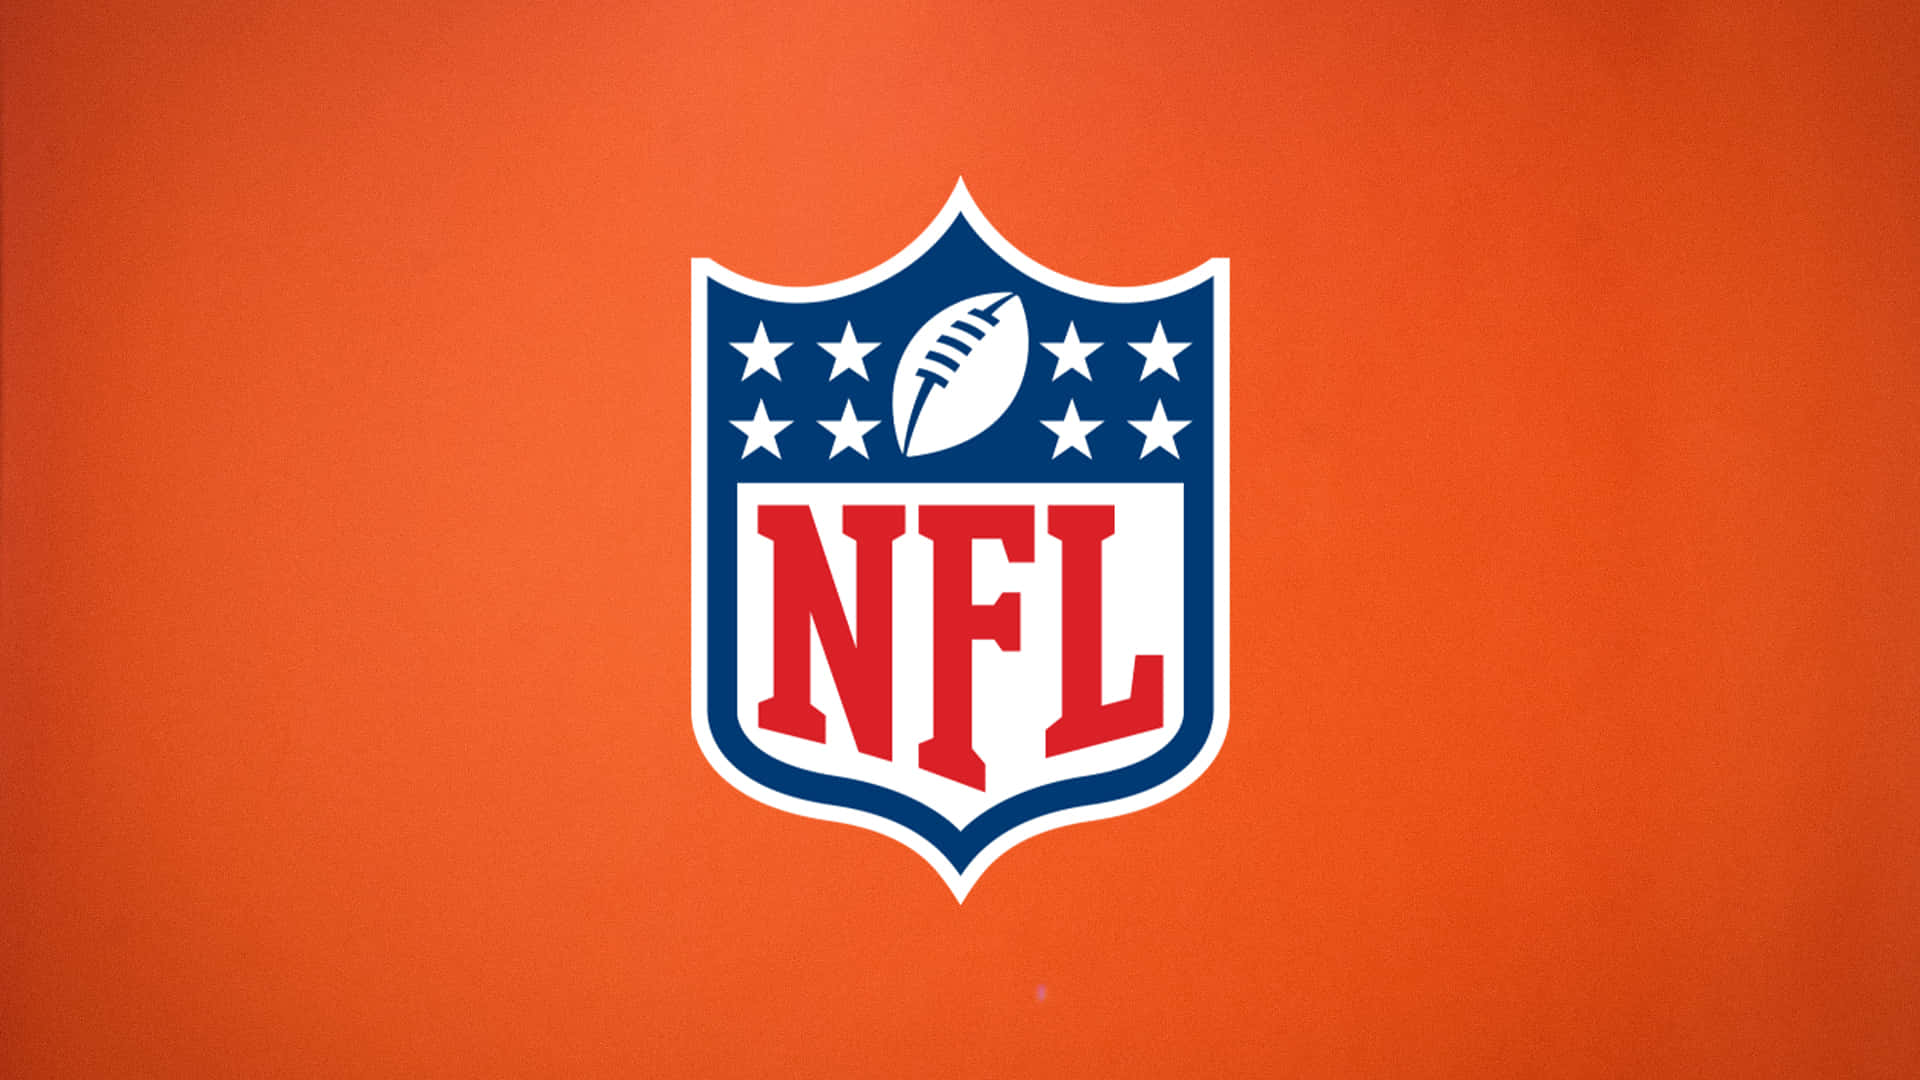 Nfllogo: The Official Logo Of Professional American Football